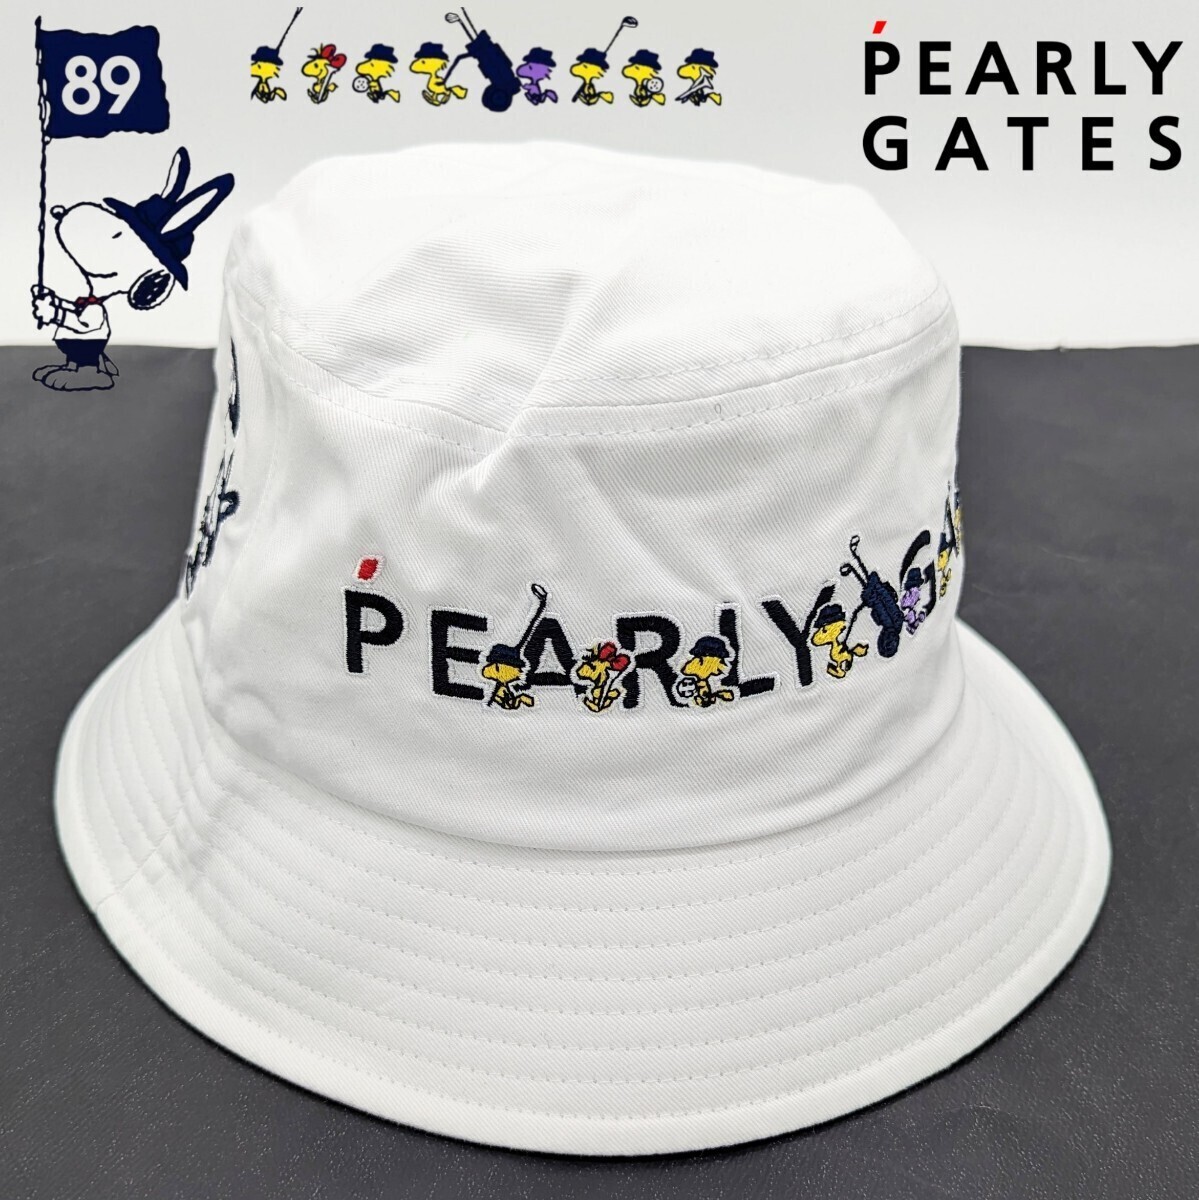 * new goods regular goods most new work model PEARLYGATES/ Pearly Gates SNOOPY hat (UNISEX) Snoopy . proportion ... inspection .. limitation collection complete sale goods 